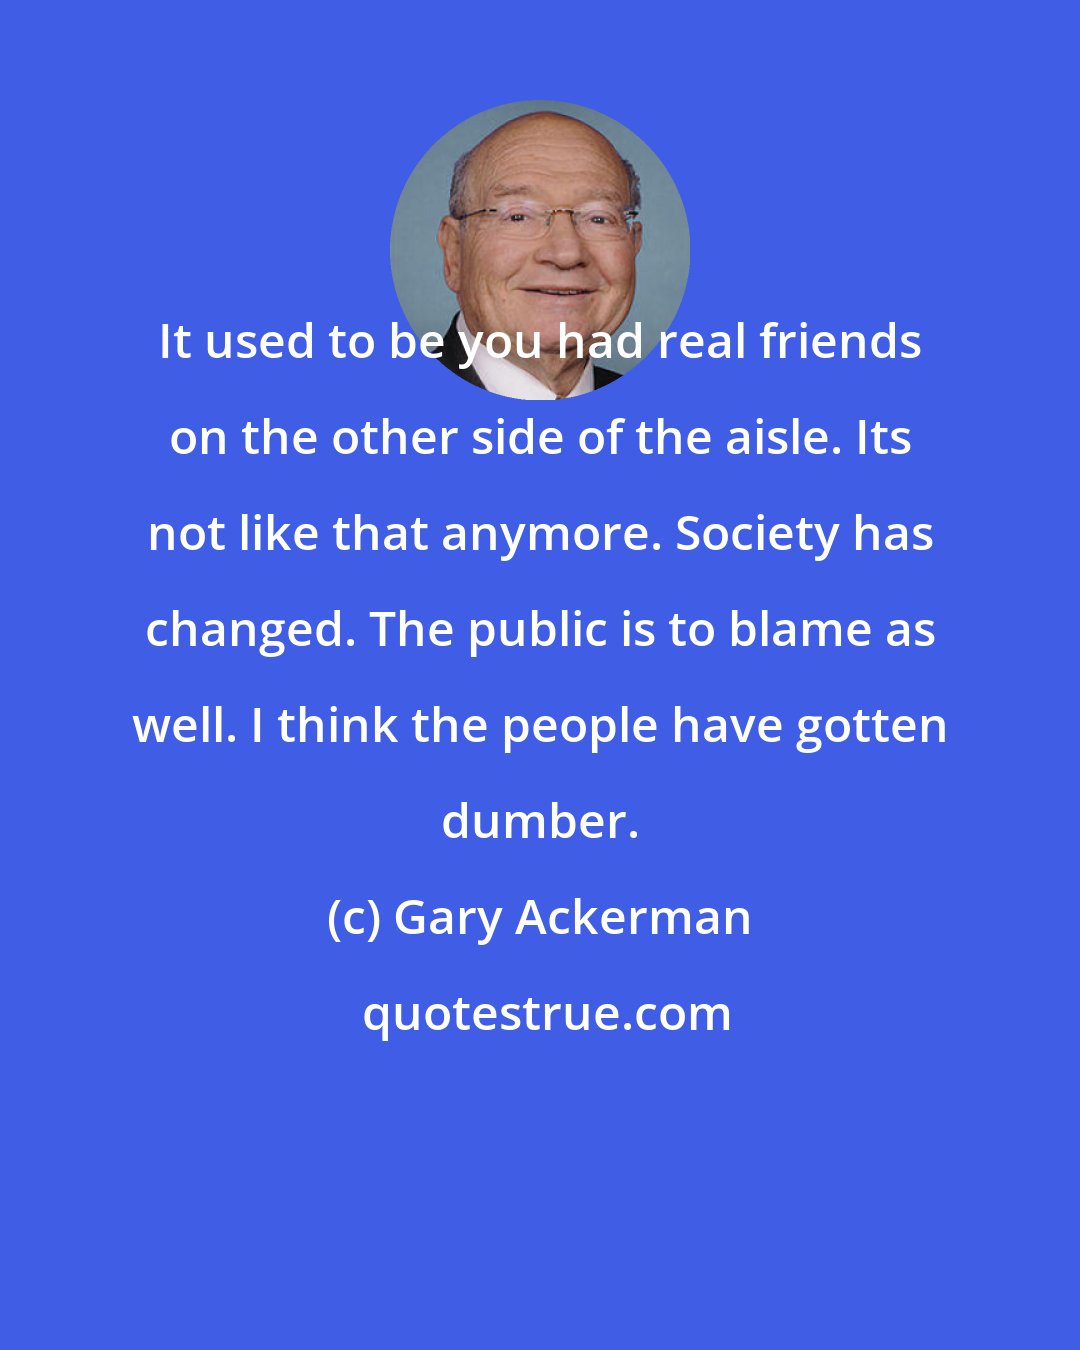 Gary Ackerman: It used to be you had real friends on the other side of the aisle. Its not like that anymore. Society has changed. The public is to blame as well. I think the people have gotten dumber.